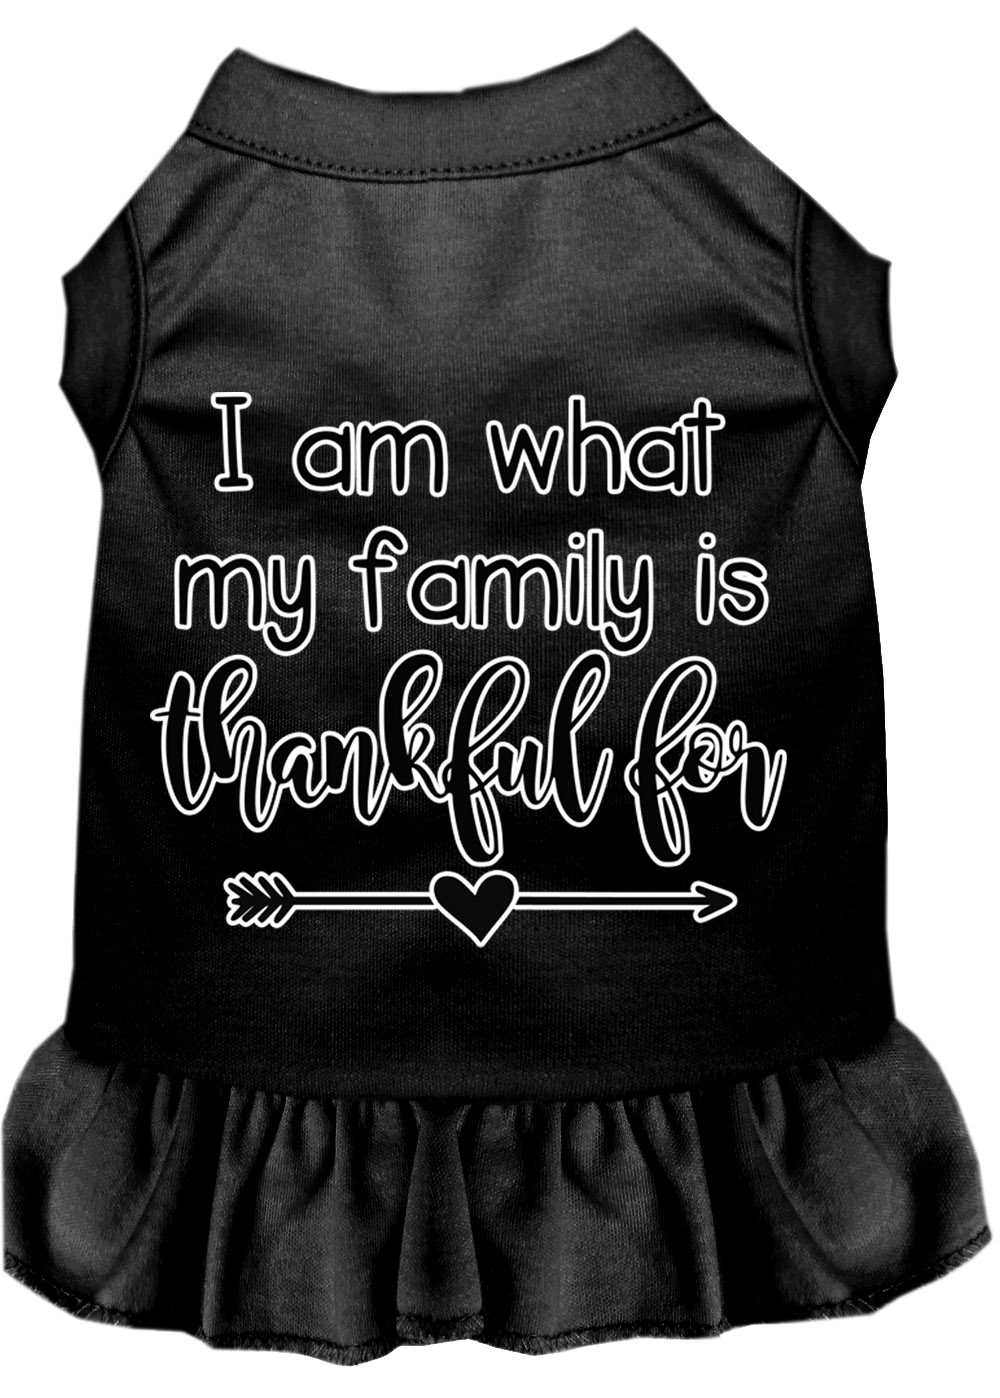 I Am What My Family is Thankful For Screen Print Dog Dress Black Lg